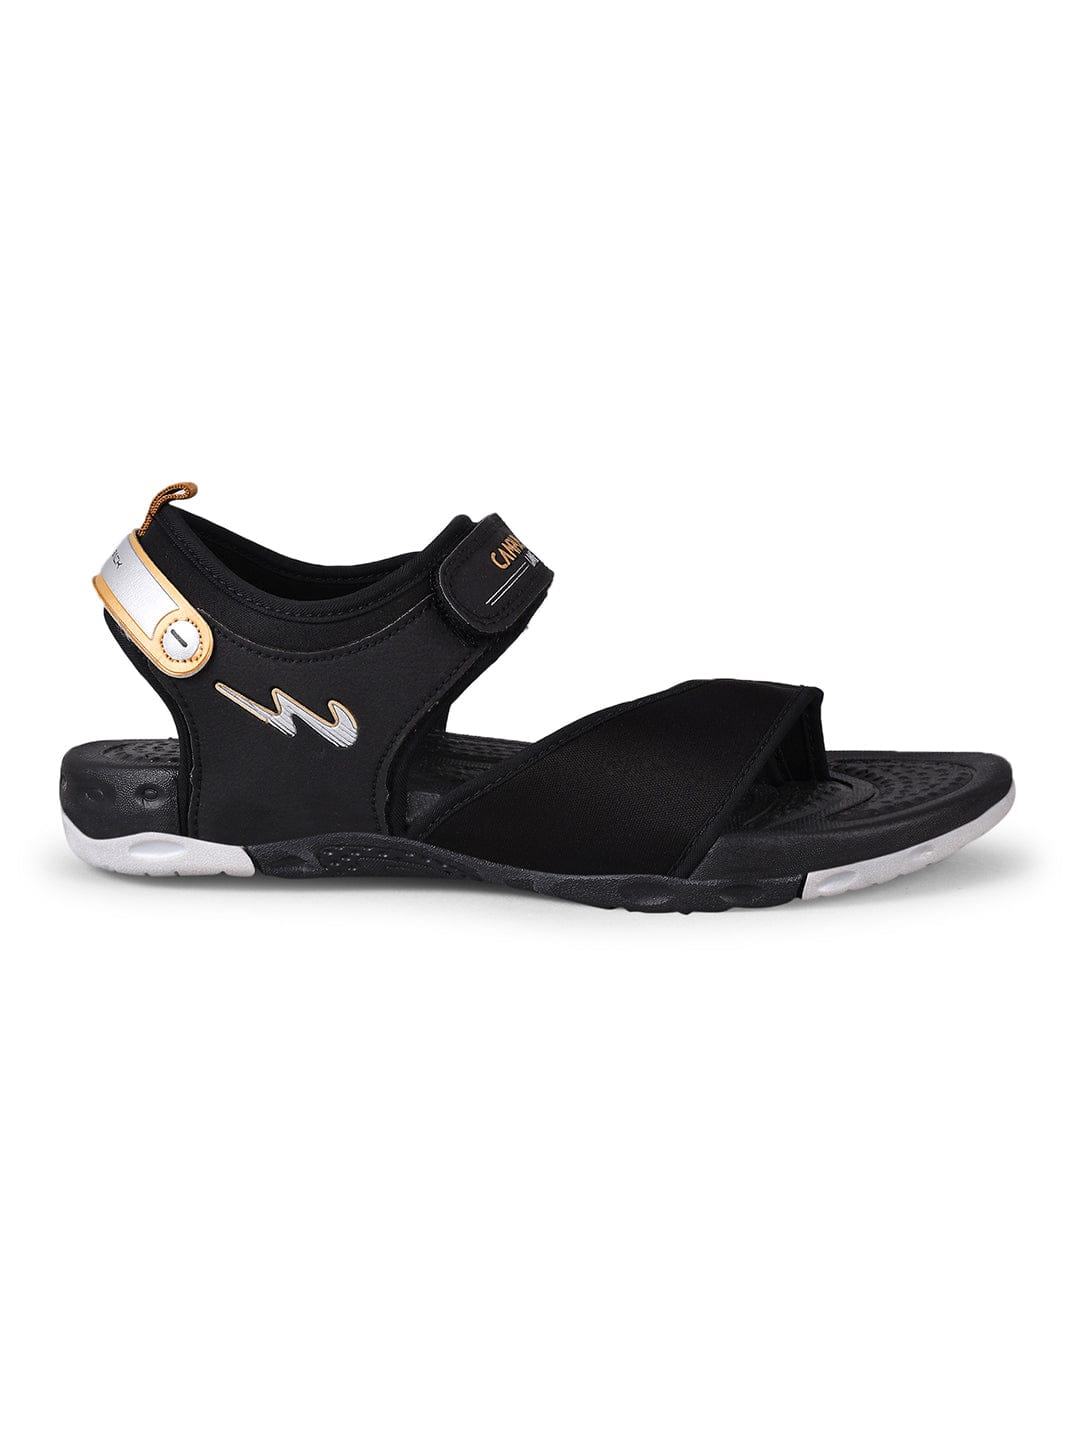 Buy Sandals For Kids: Sd-053C-3K-Sd-053Crust-Blk549 | Campus Shoes